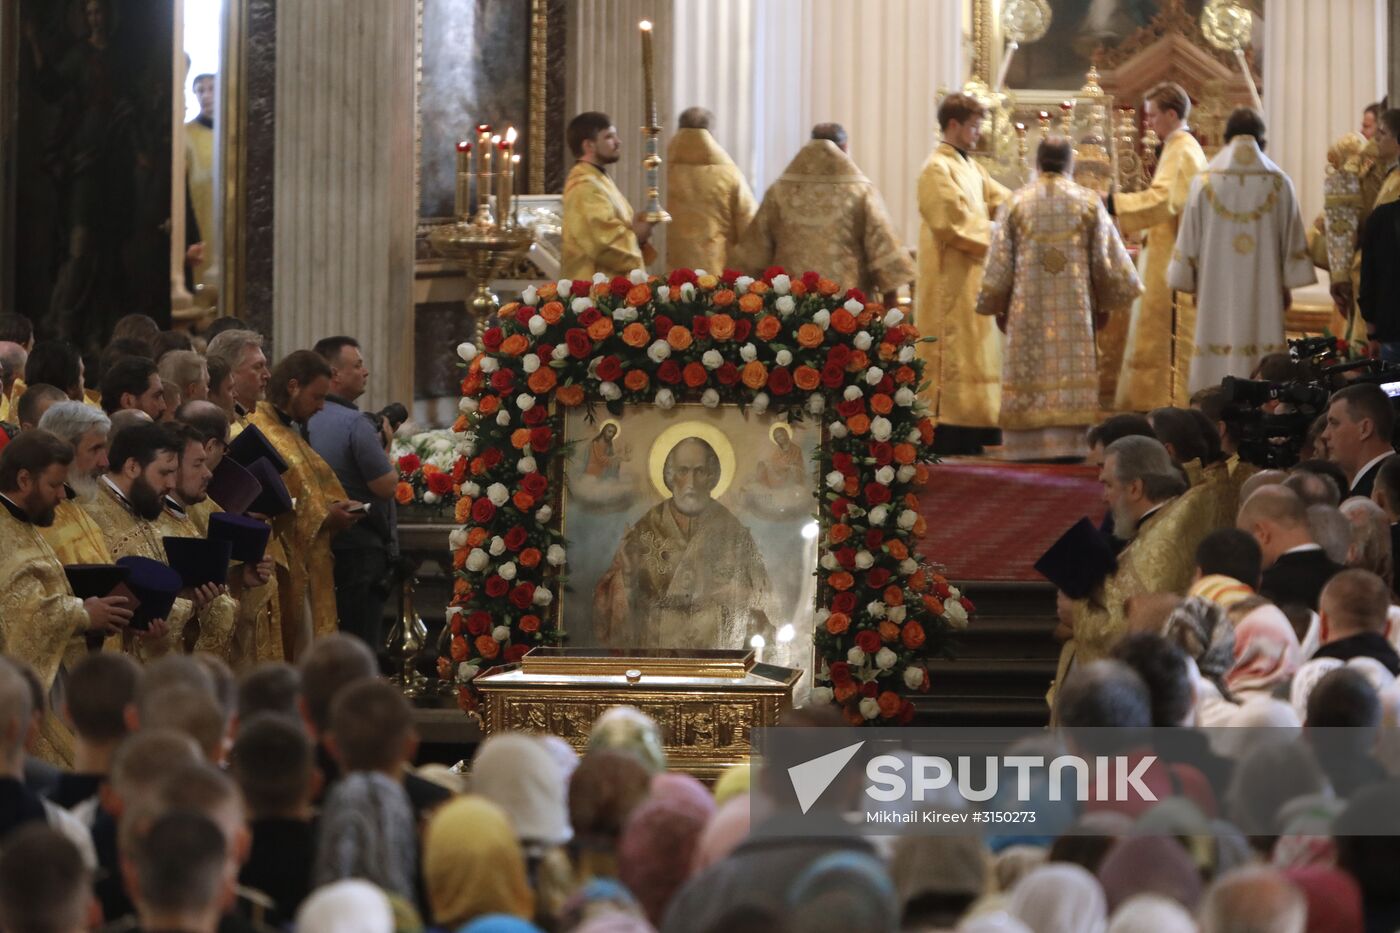 Welcoming for arc with St. Nicholas relics